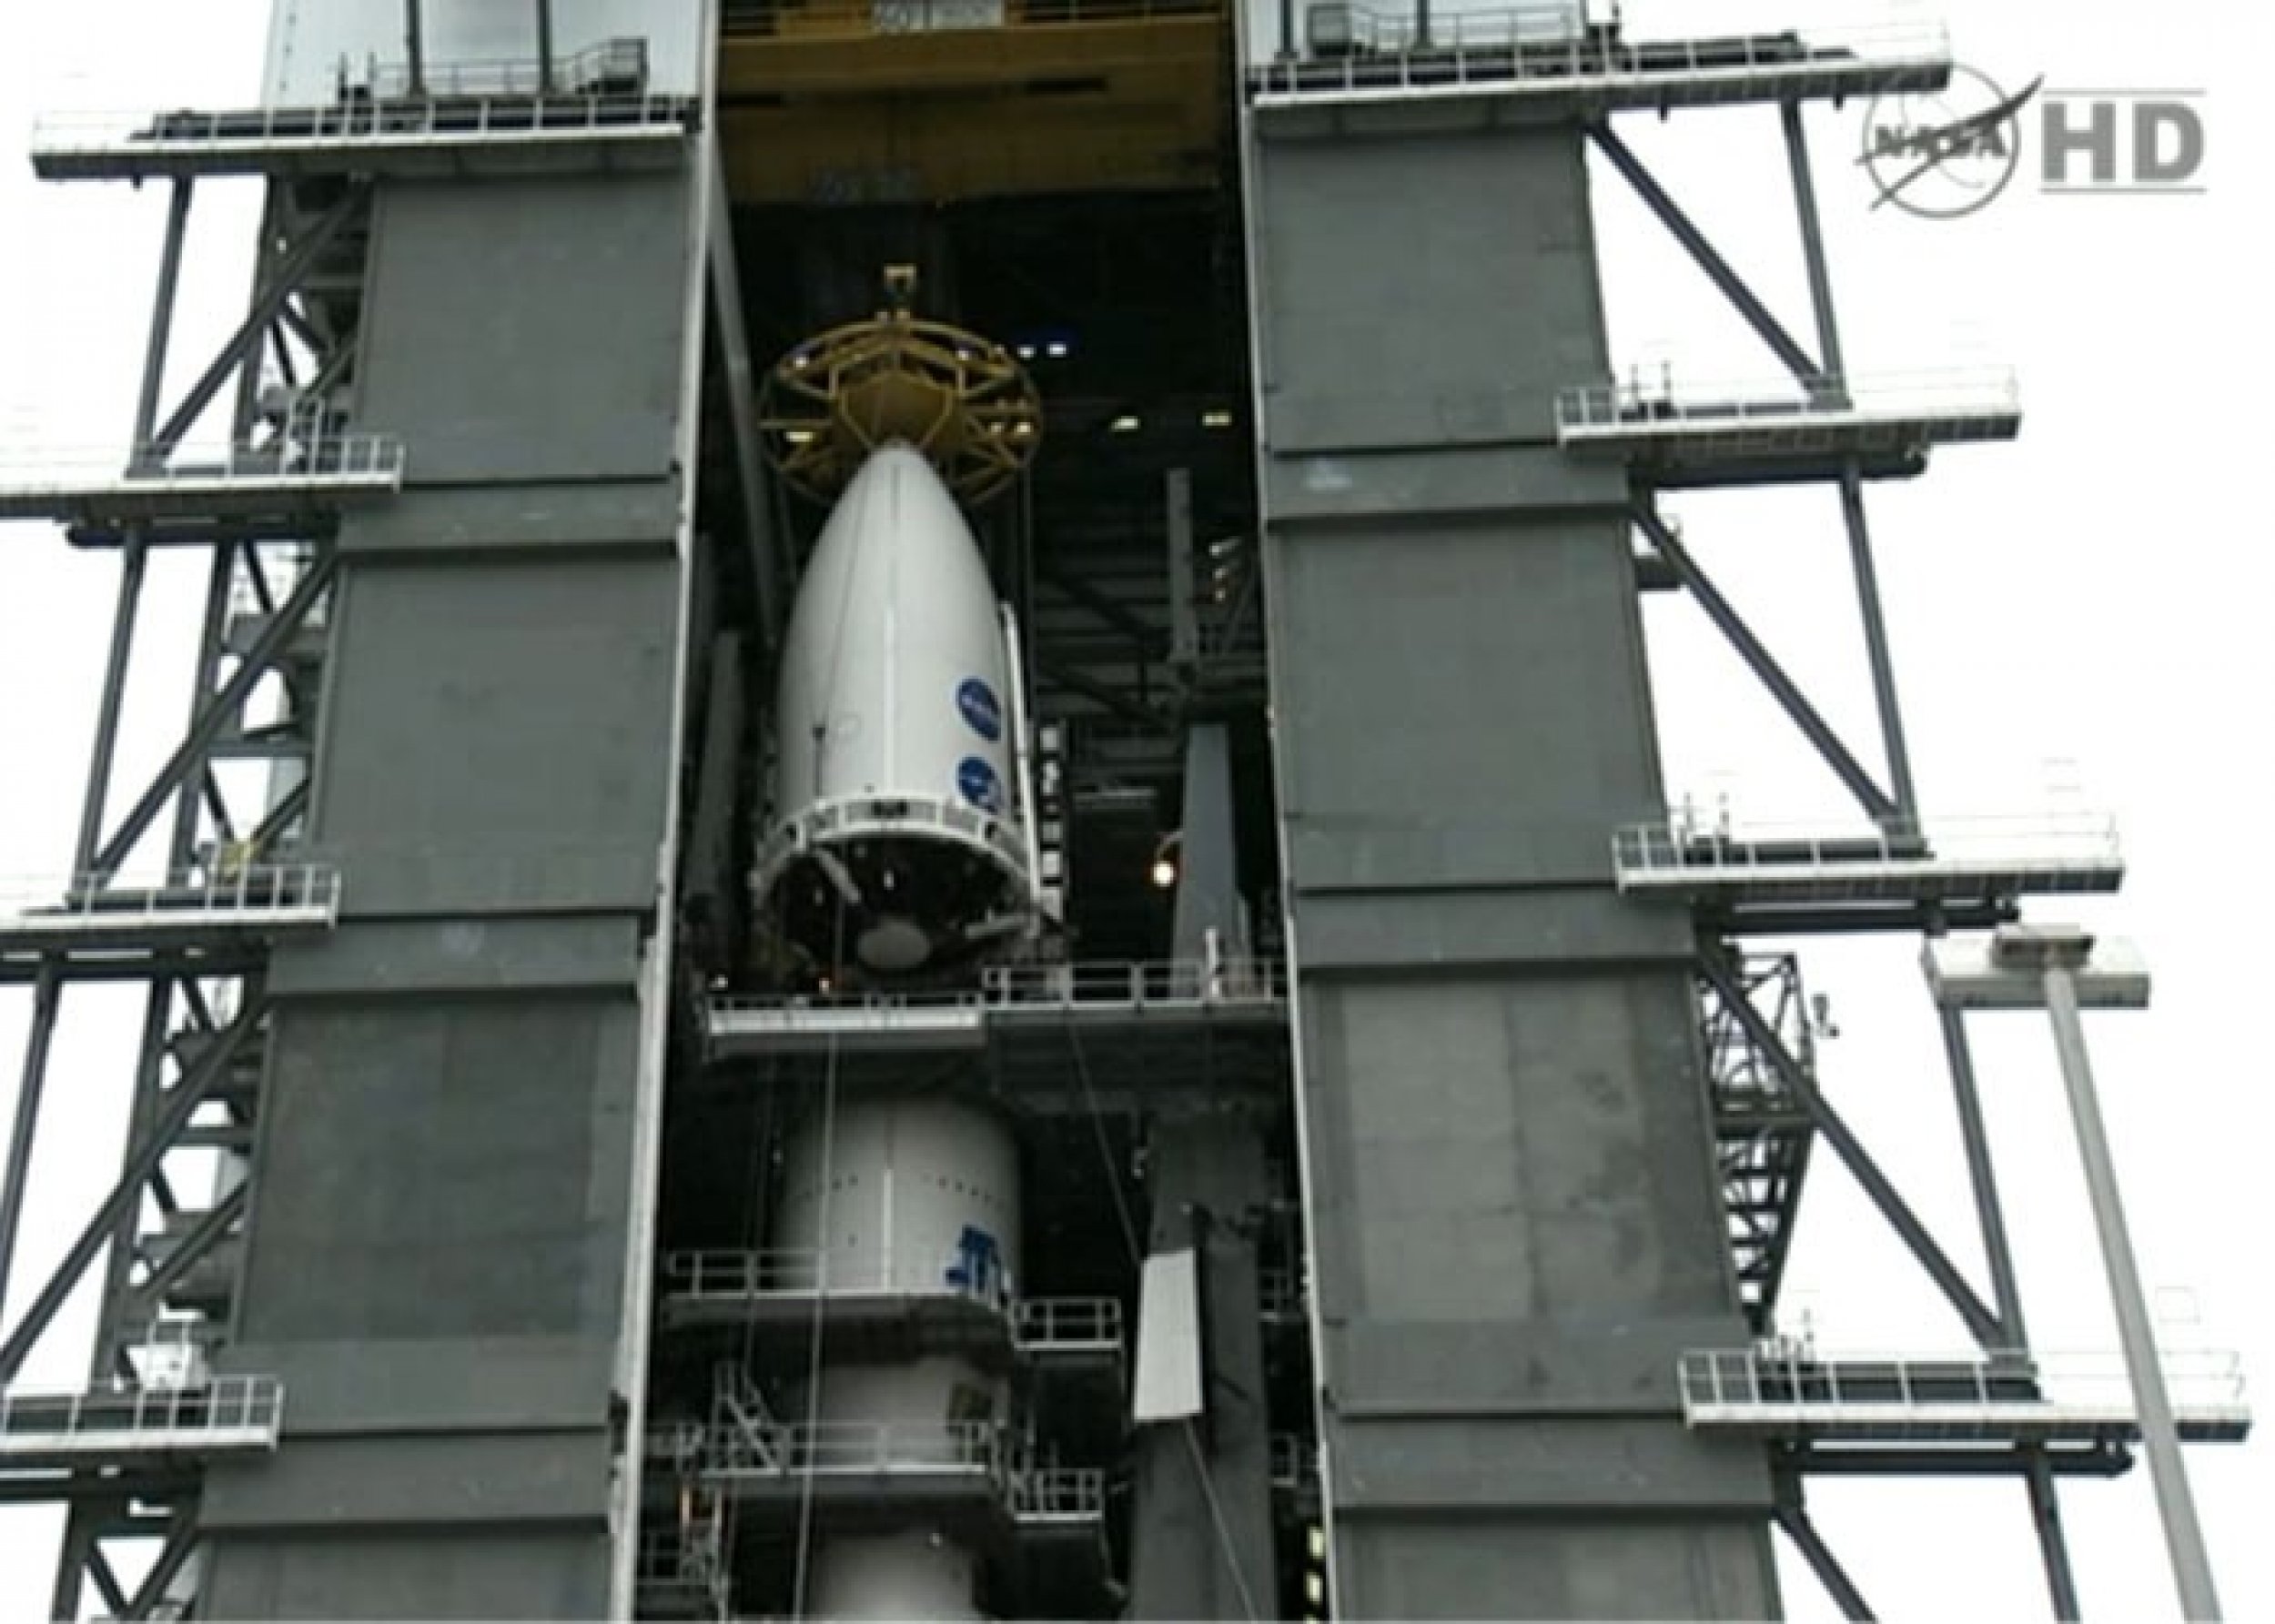 Jupiter probe Juno, which rests inside a part of Atlas V rocket, is being hoisted up the launch pad